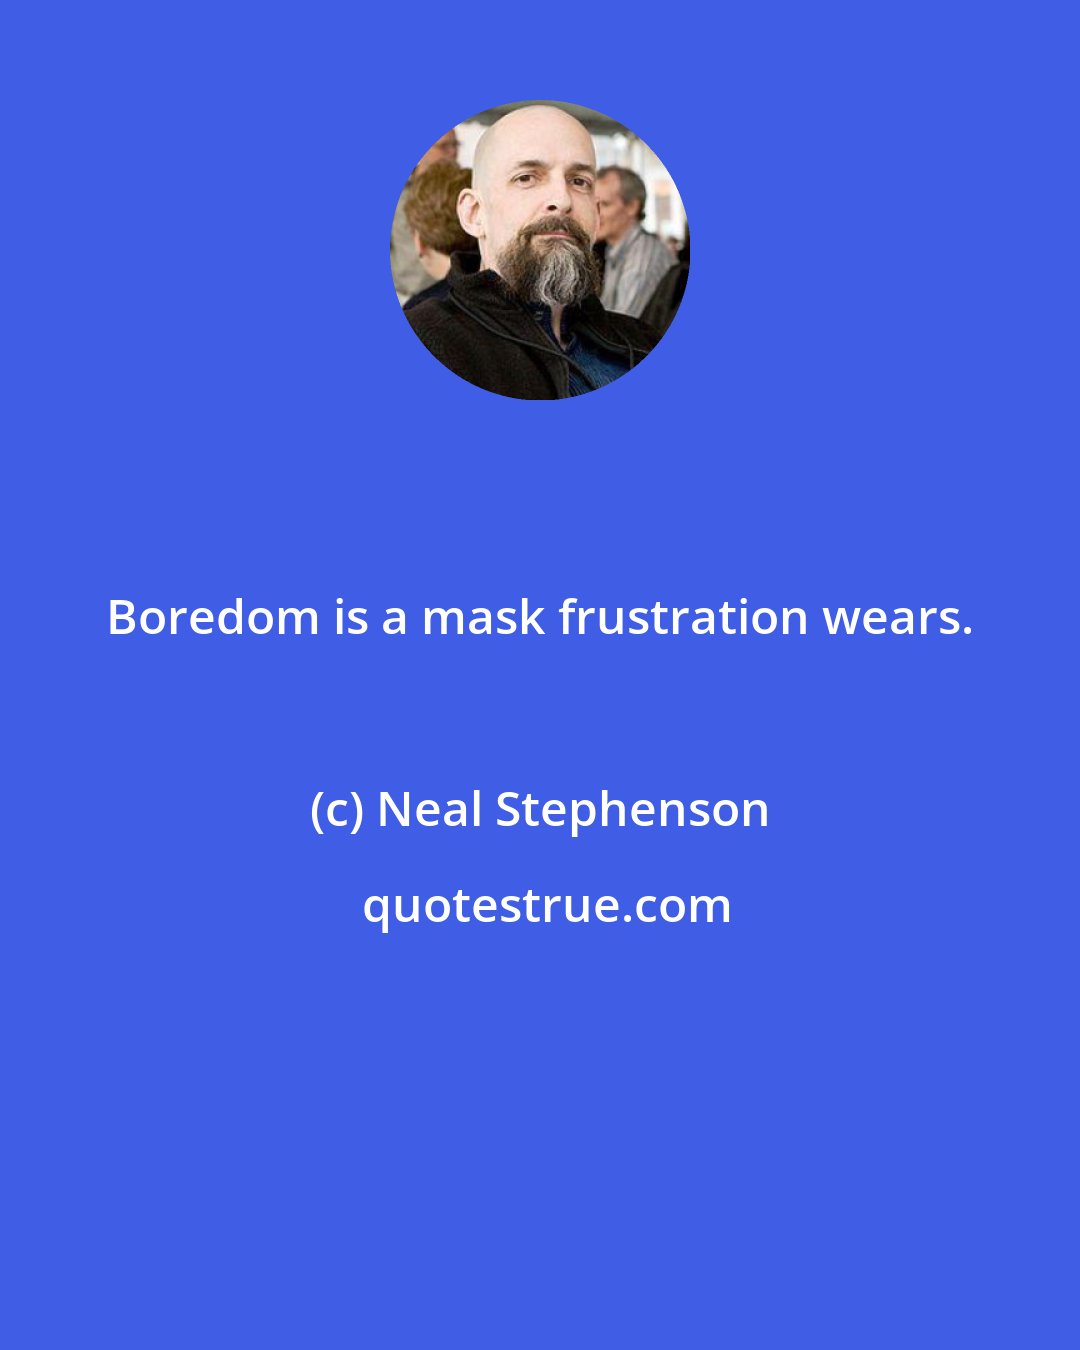 Neal Stephenson: Boredom is a mask frustration wears.